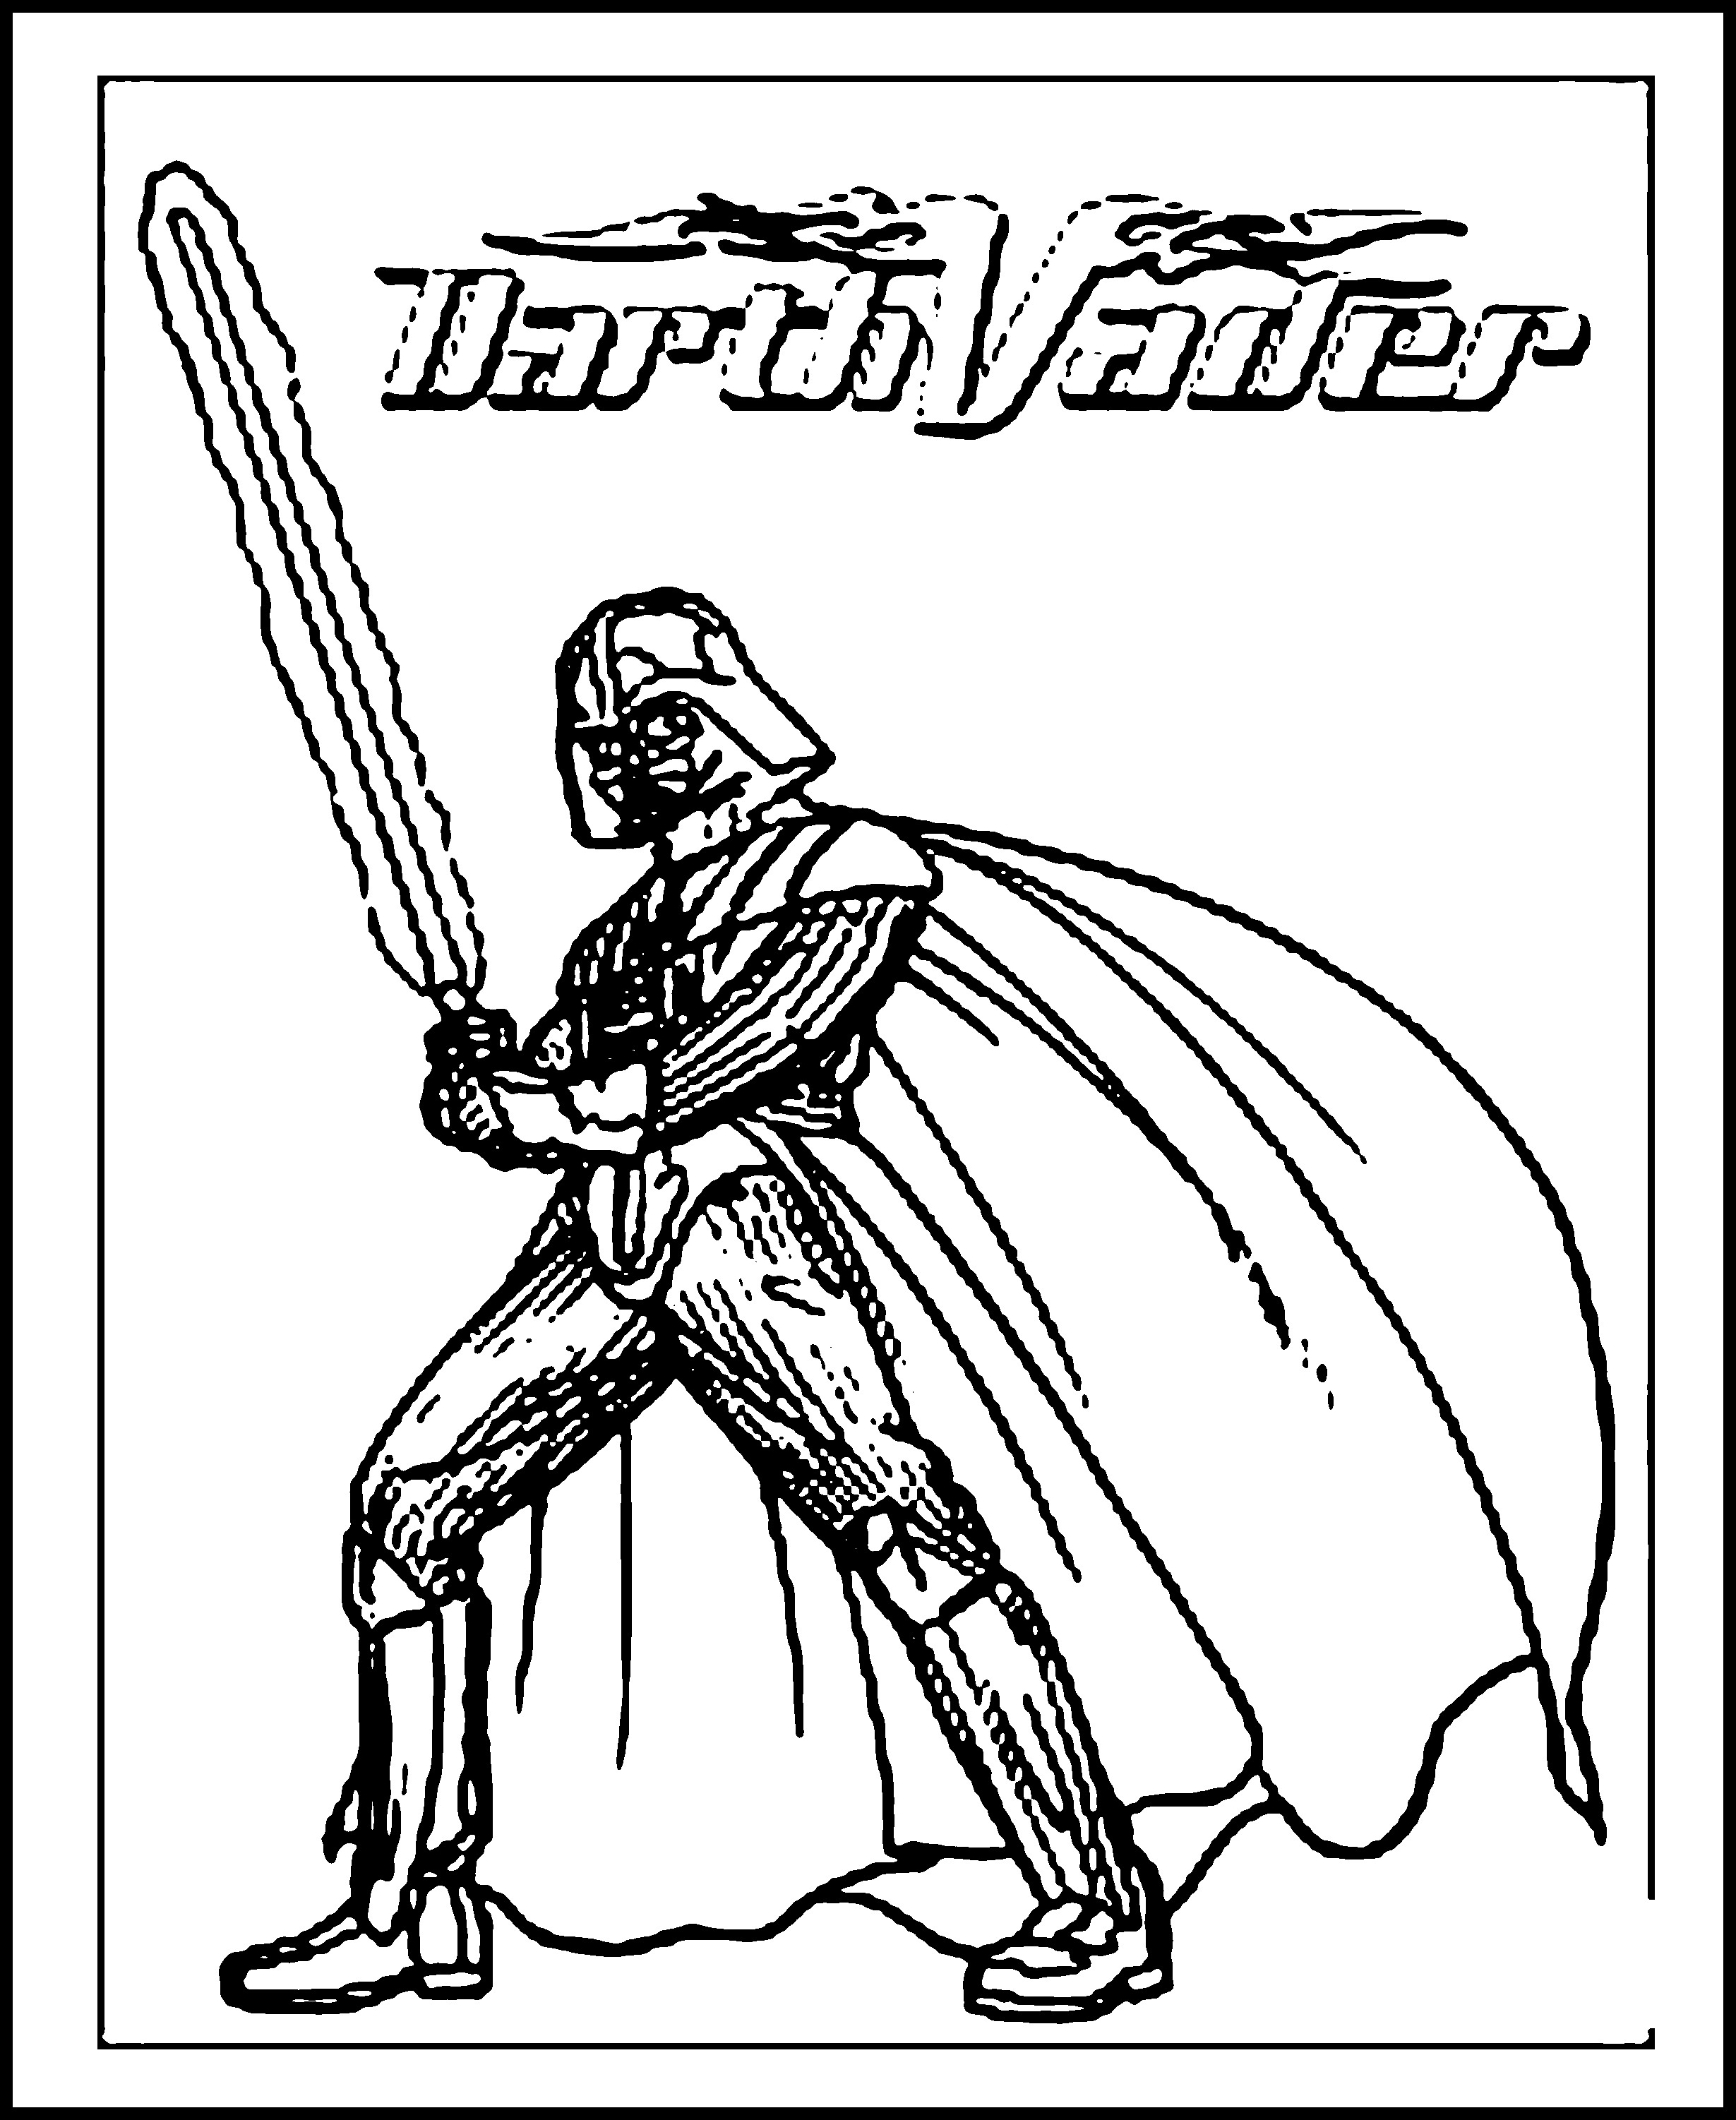 star wars coloring pages to print Image Source